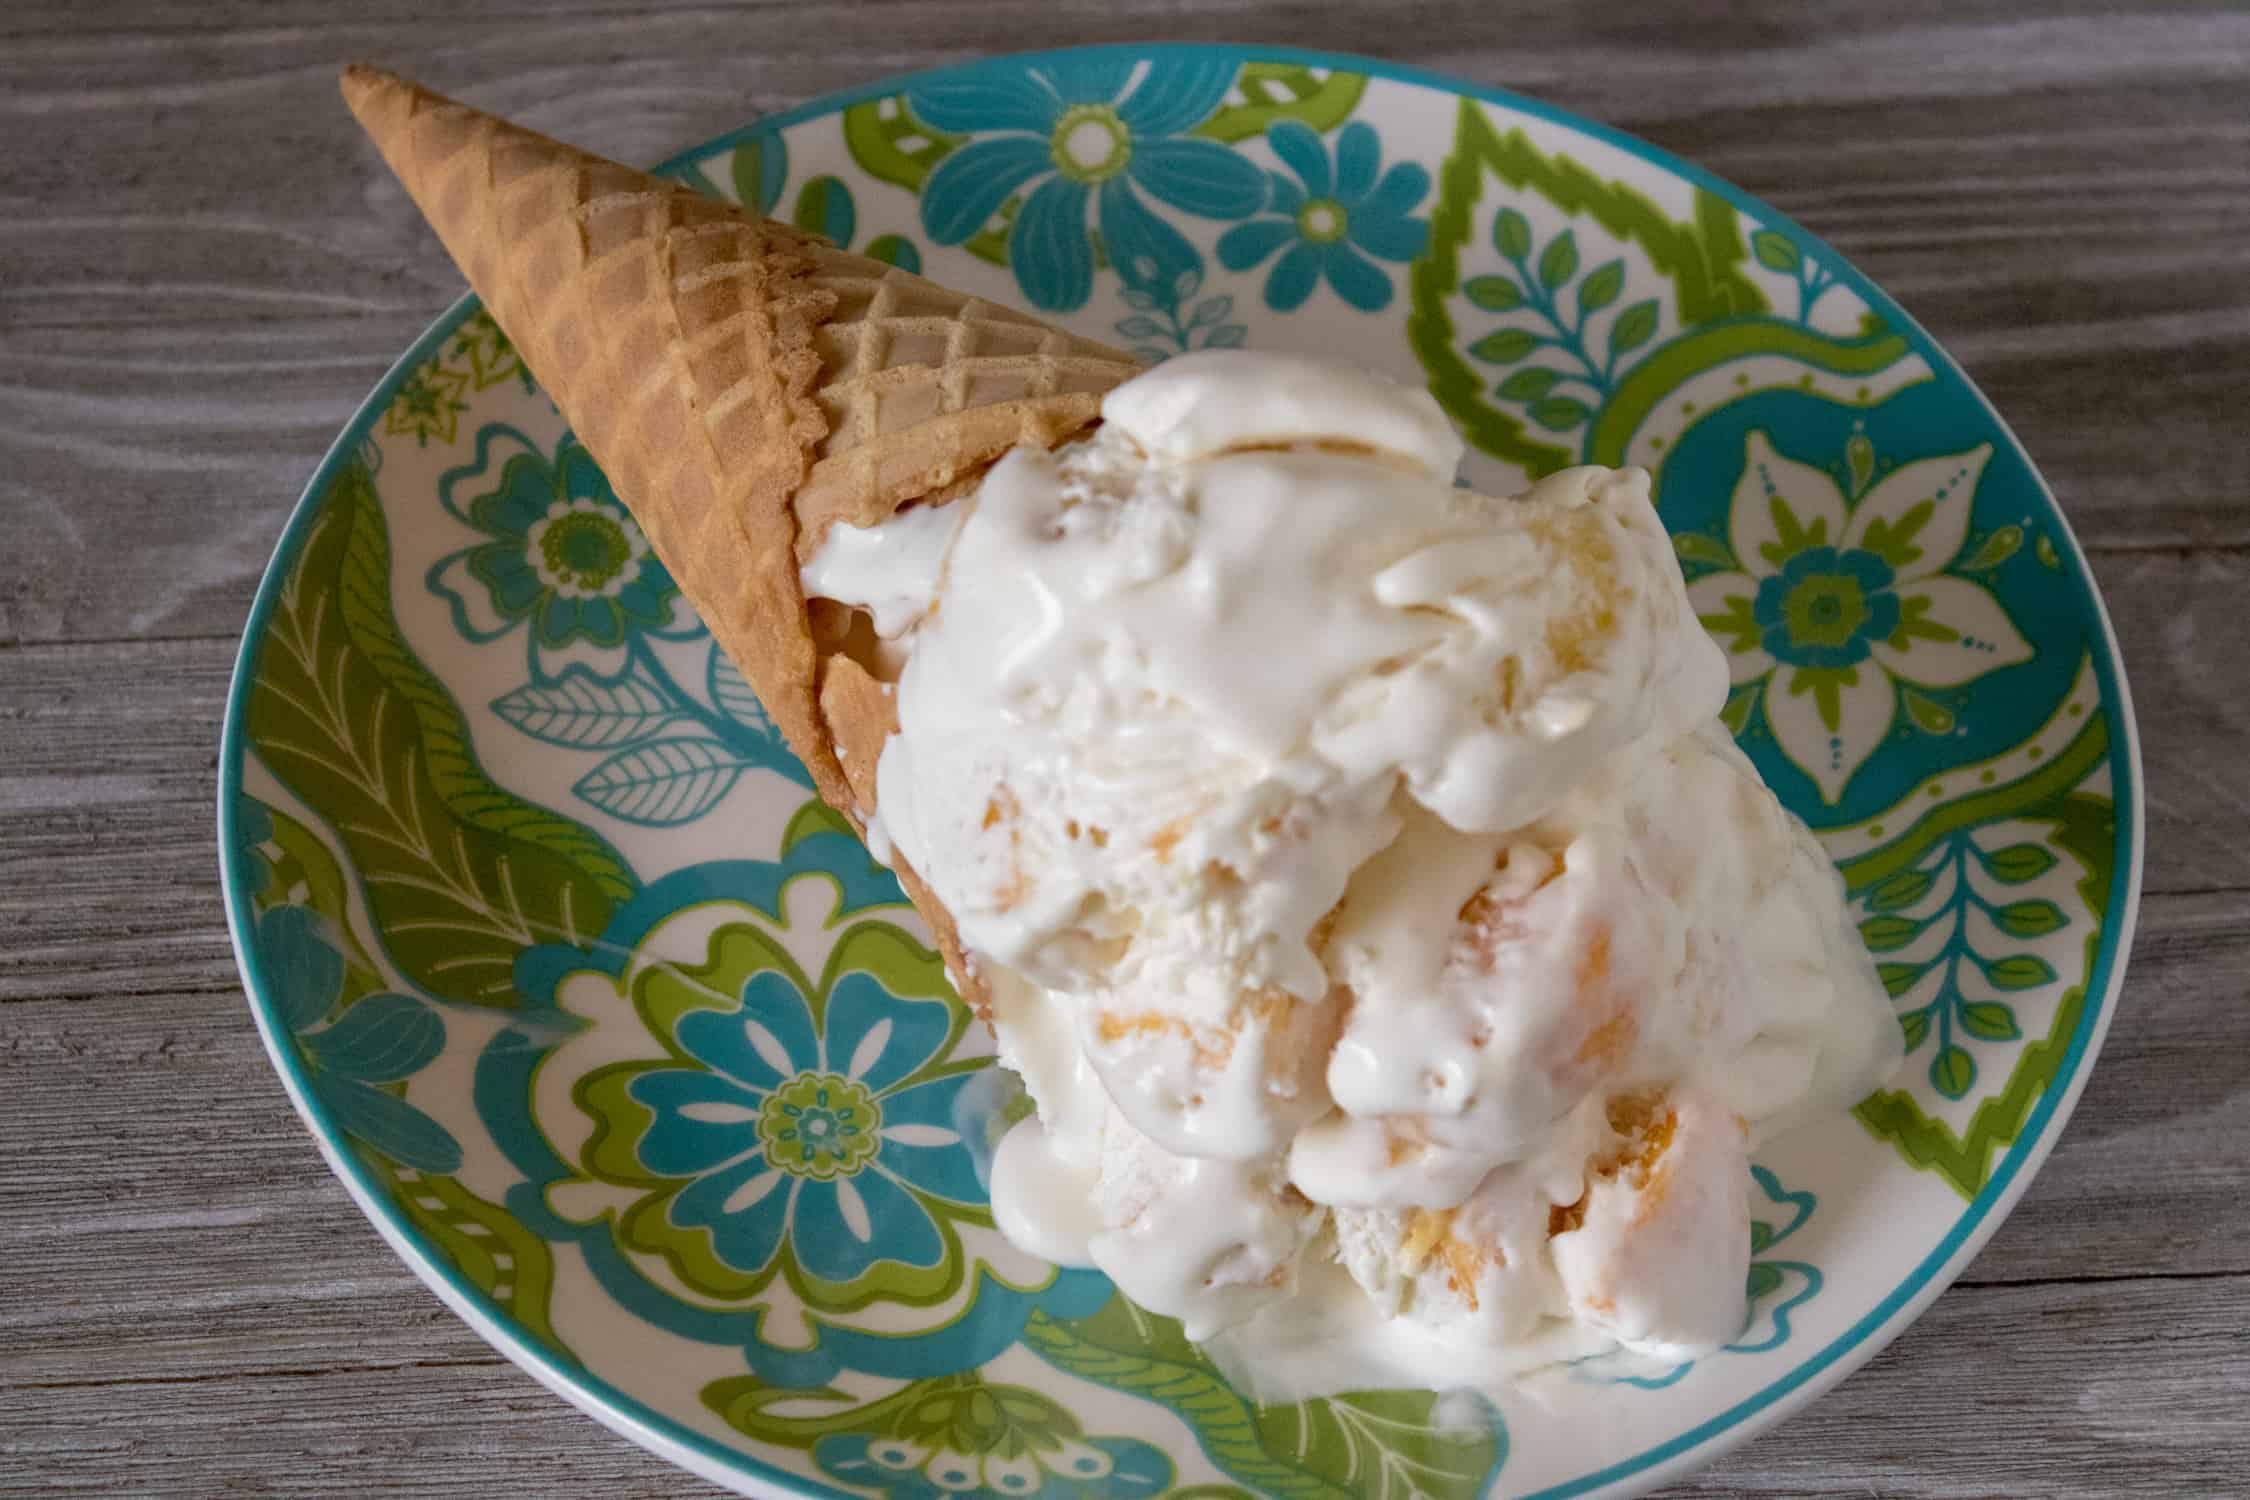 Tropical No-Churn Ice Cream served with a sugar cone on a blue and green patterned plate